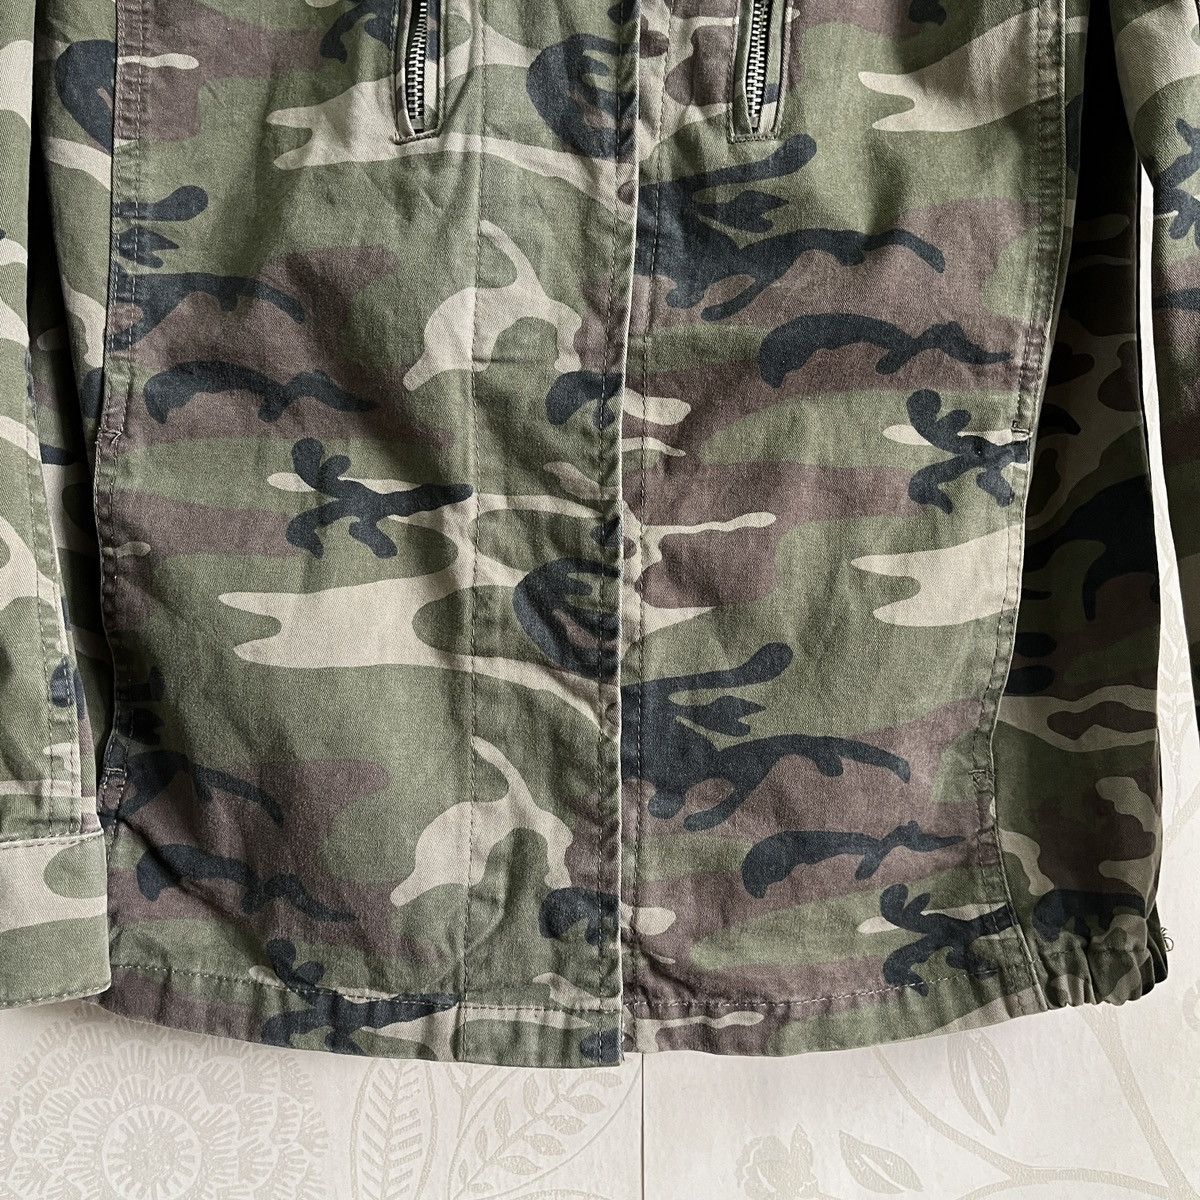 Military - Punk Army Seditionaries Jackets With Studs - 10